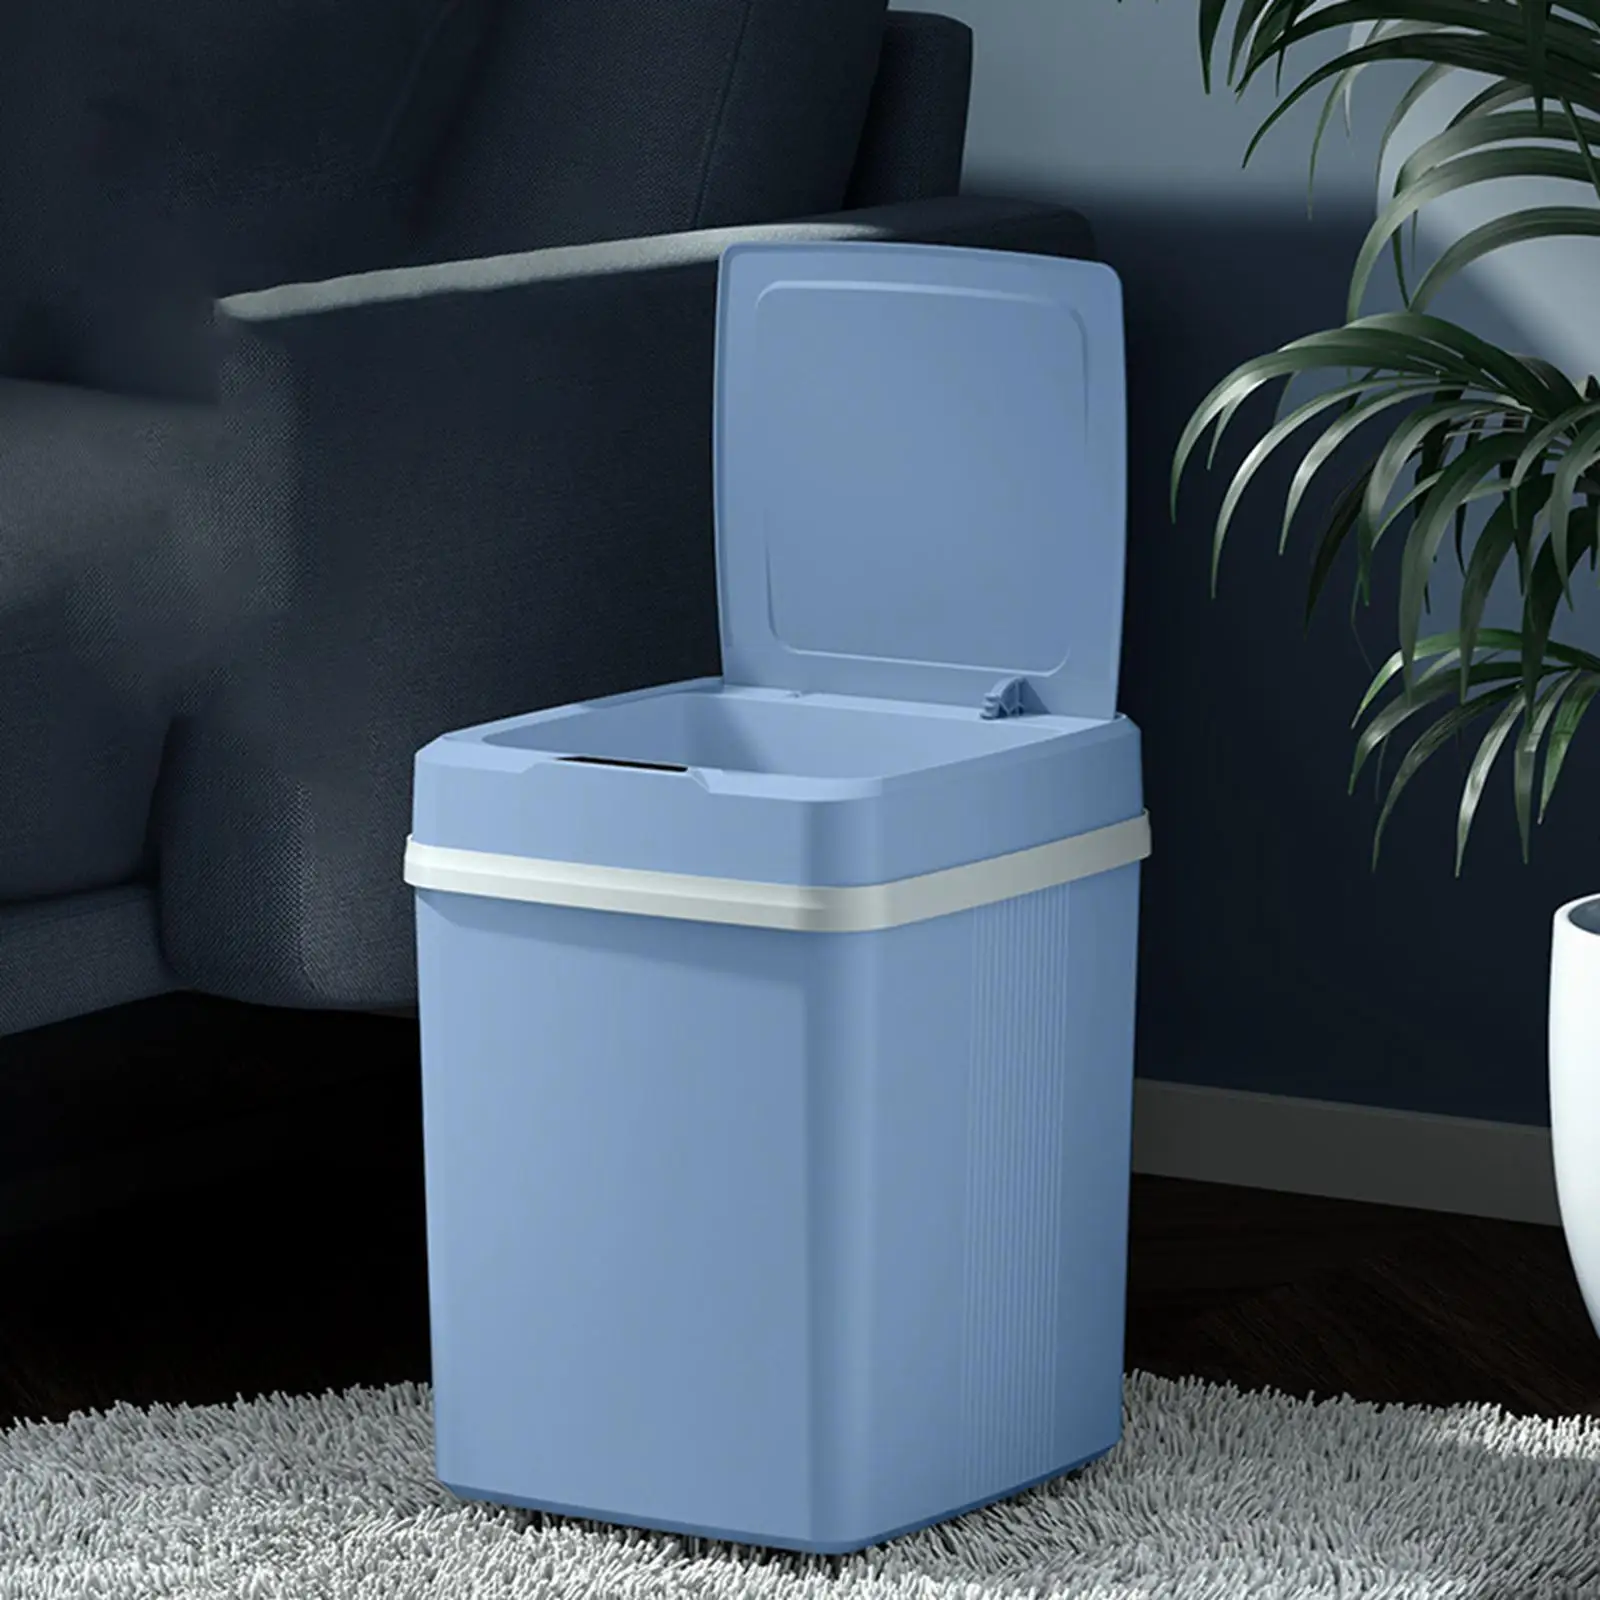 Waterproof Intelligent Garbage Bin with Lid Battery Operated 12L Motion Sensor Trash Can Household Dustbin for Living Room